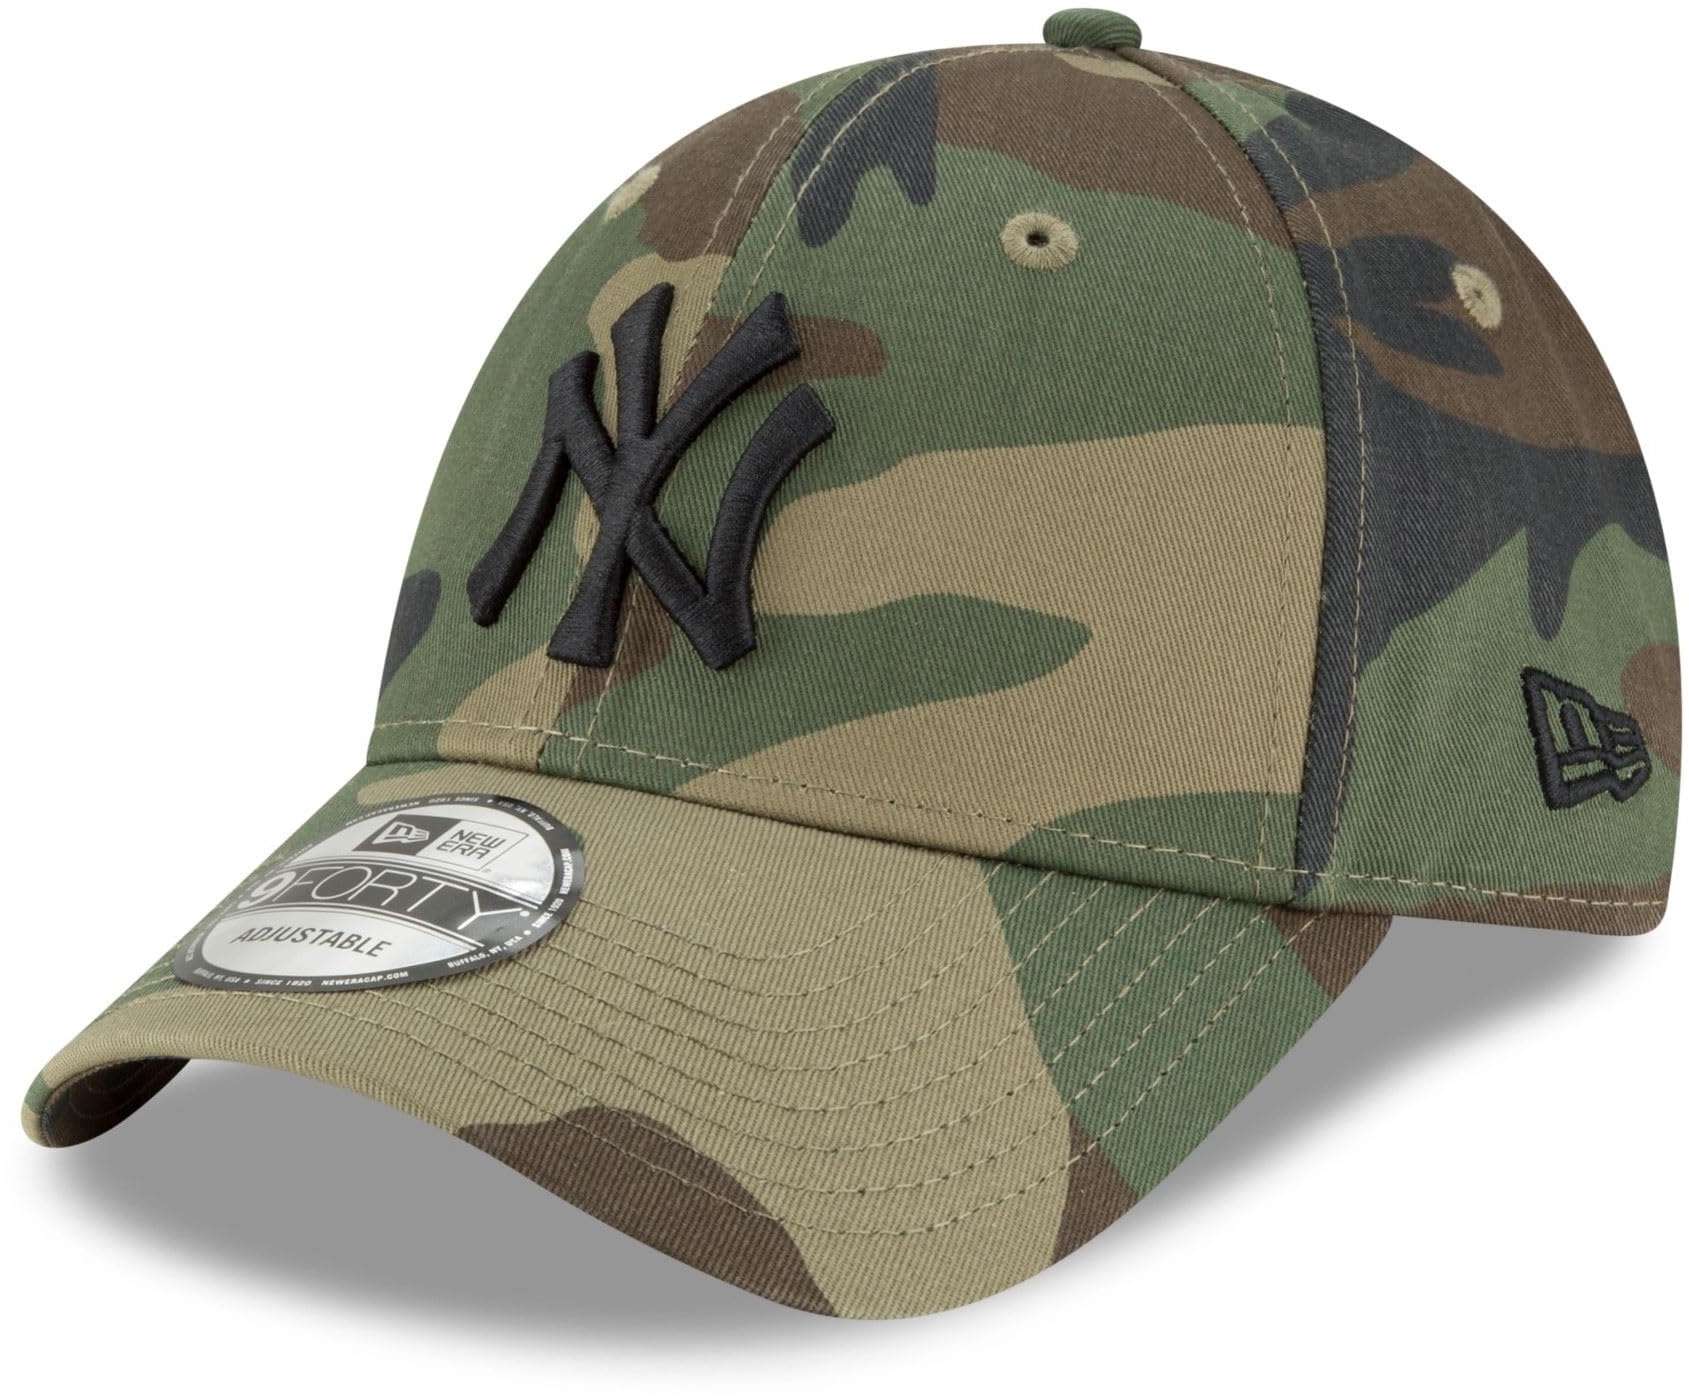 New Era New York Yankees Camouflage 9Forty Adjustable Cap - One-Size